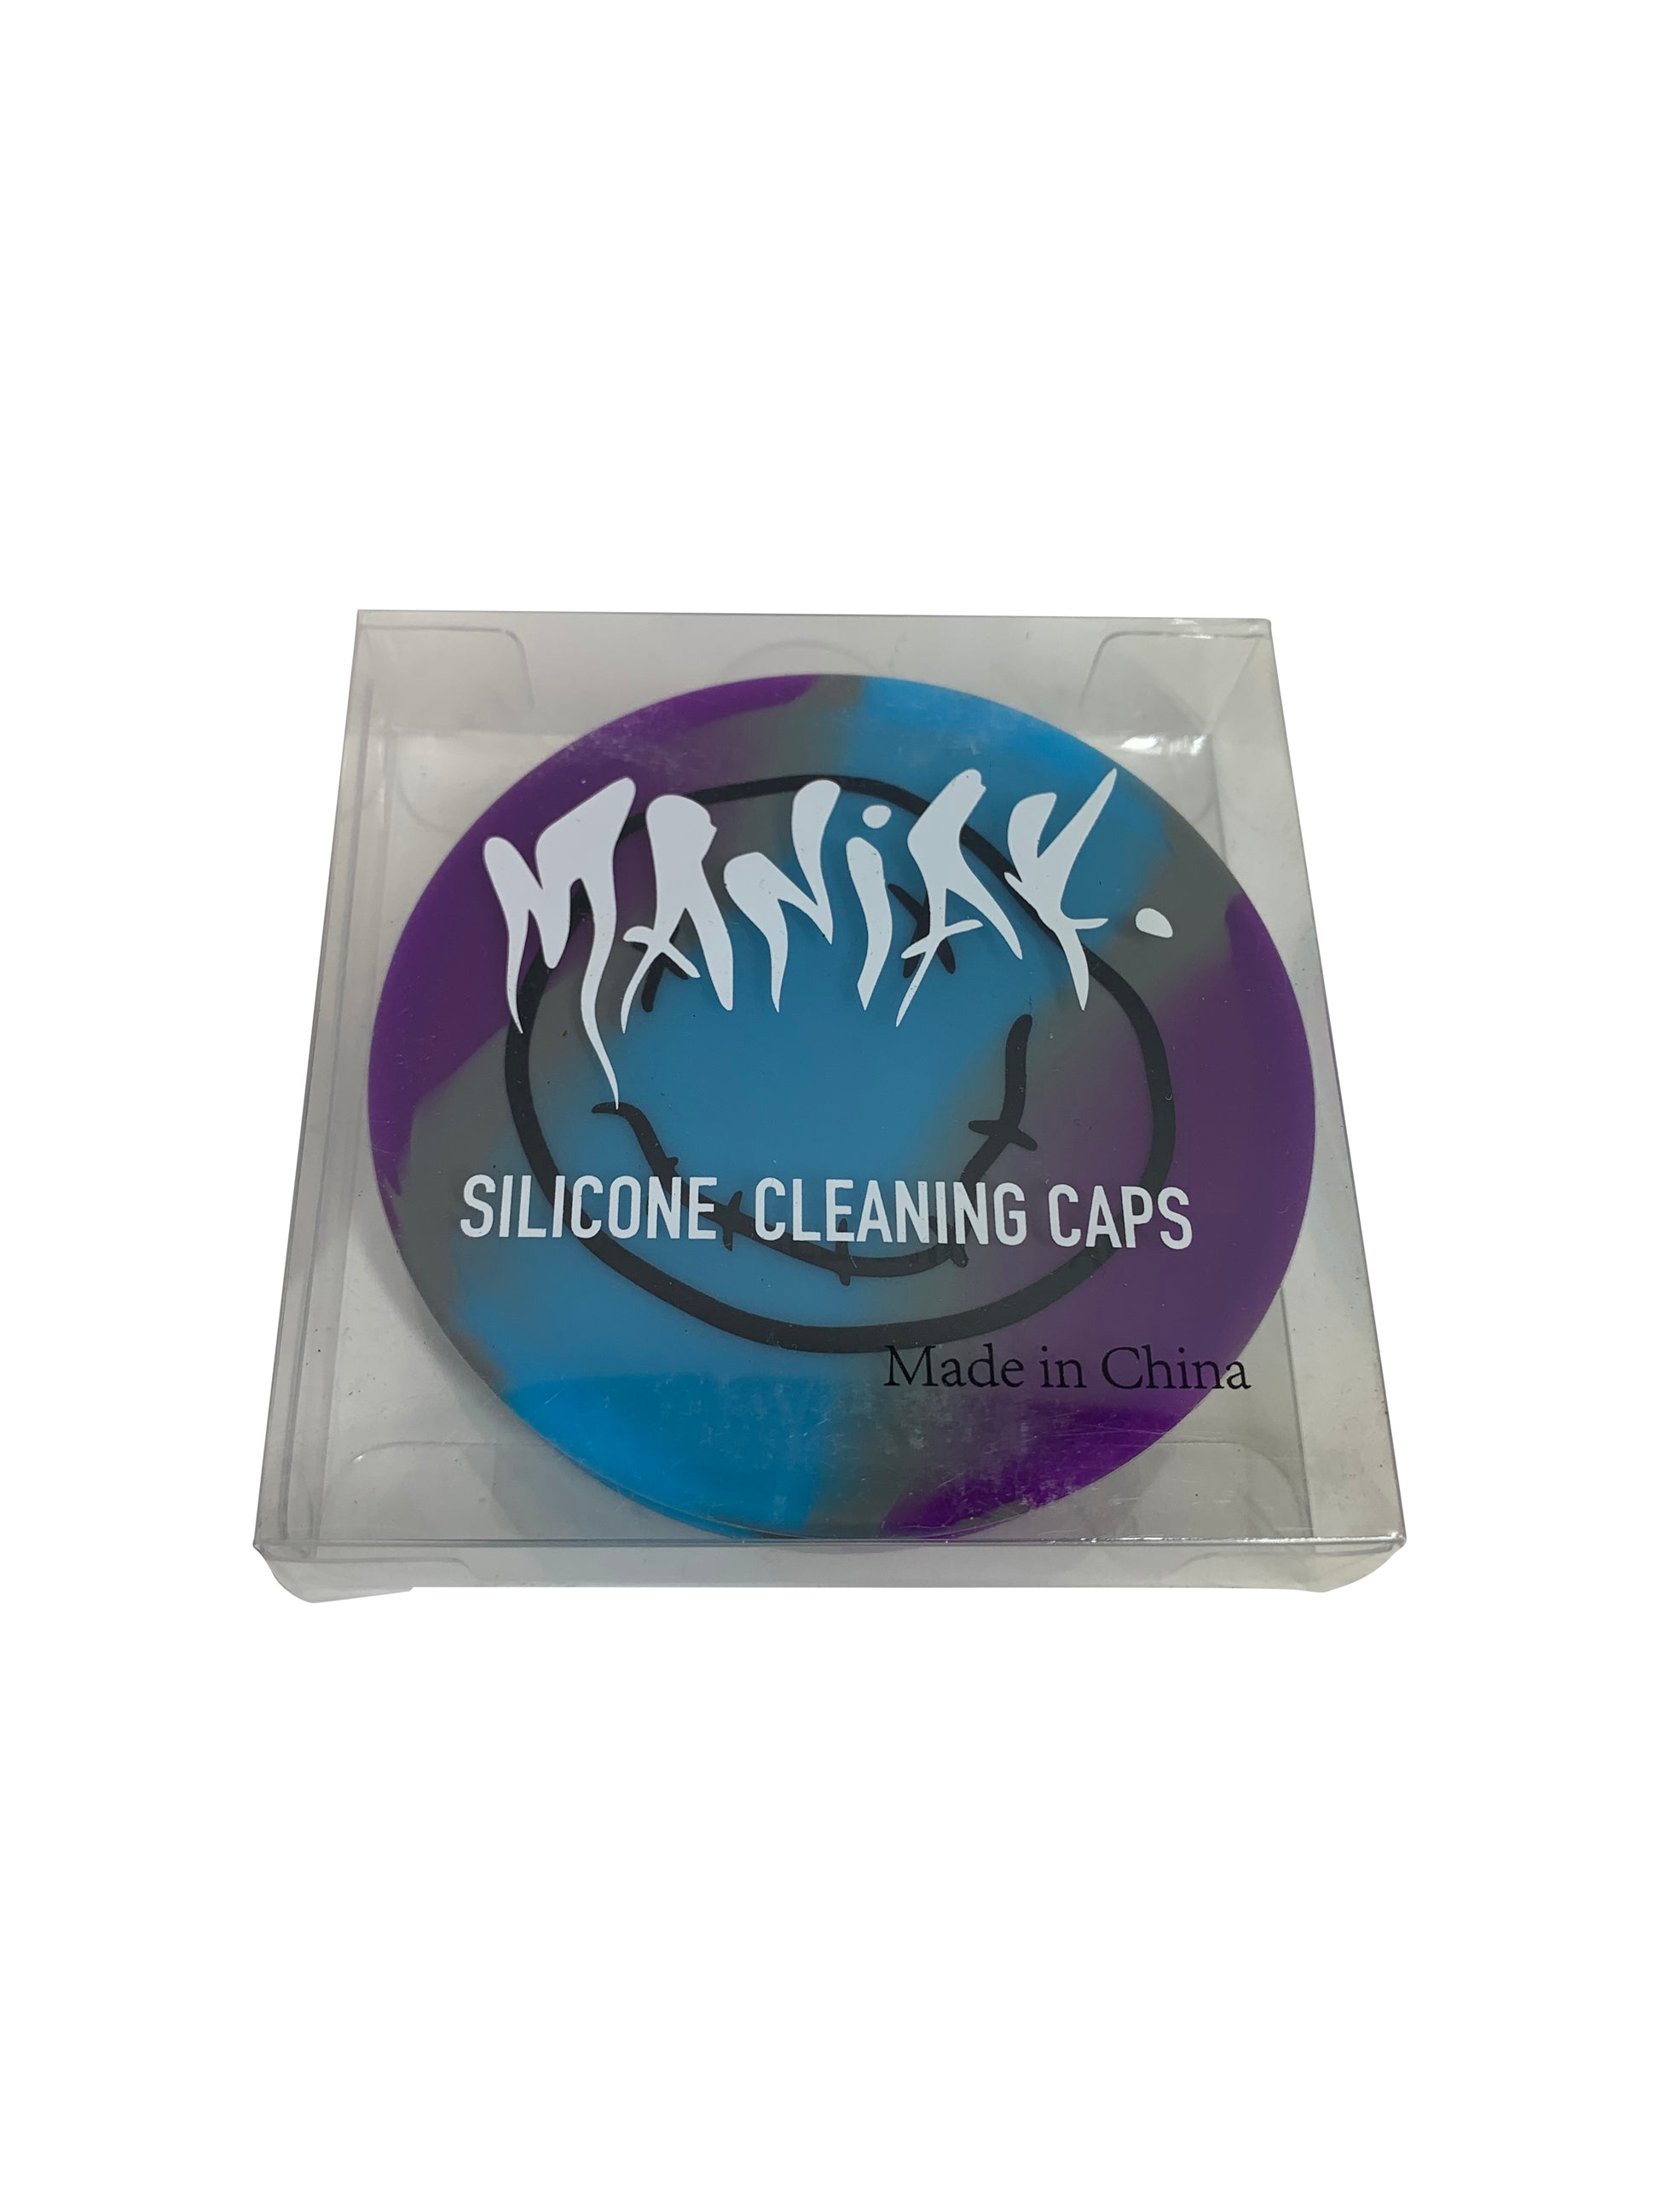 Maniak Silicone Cleaning Caps